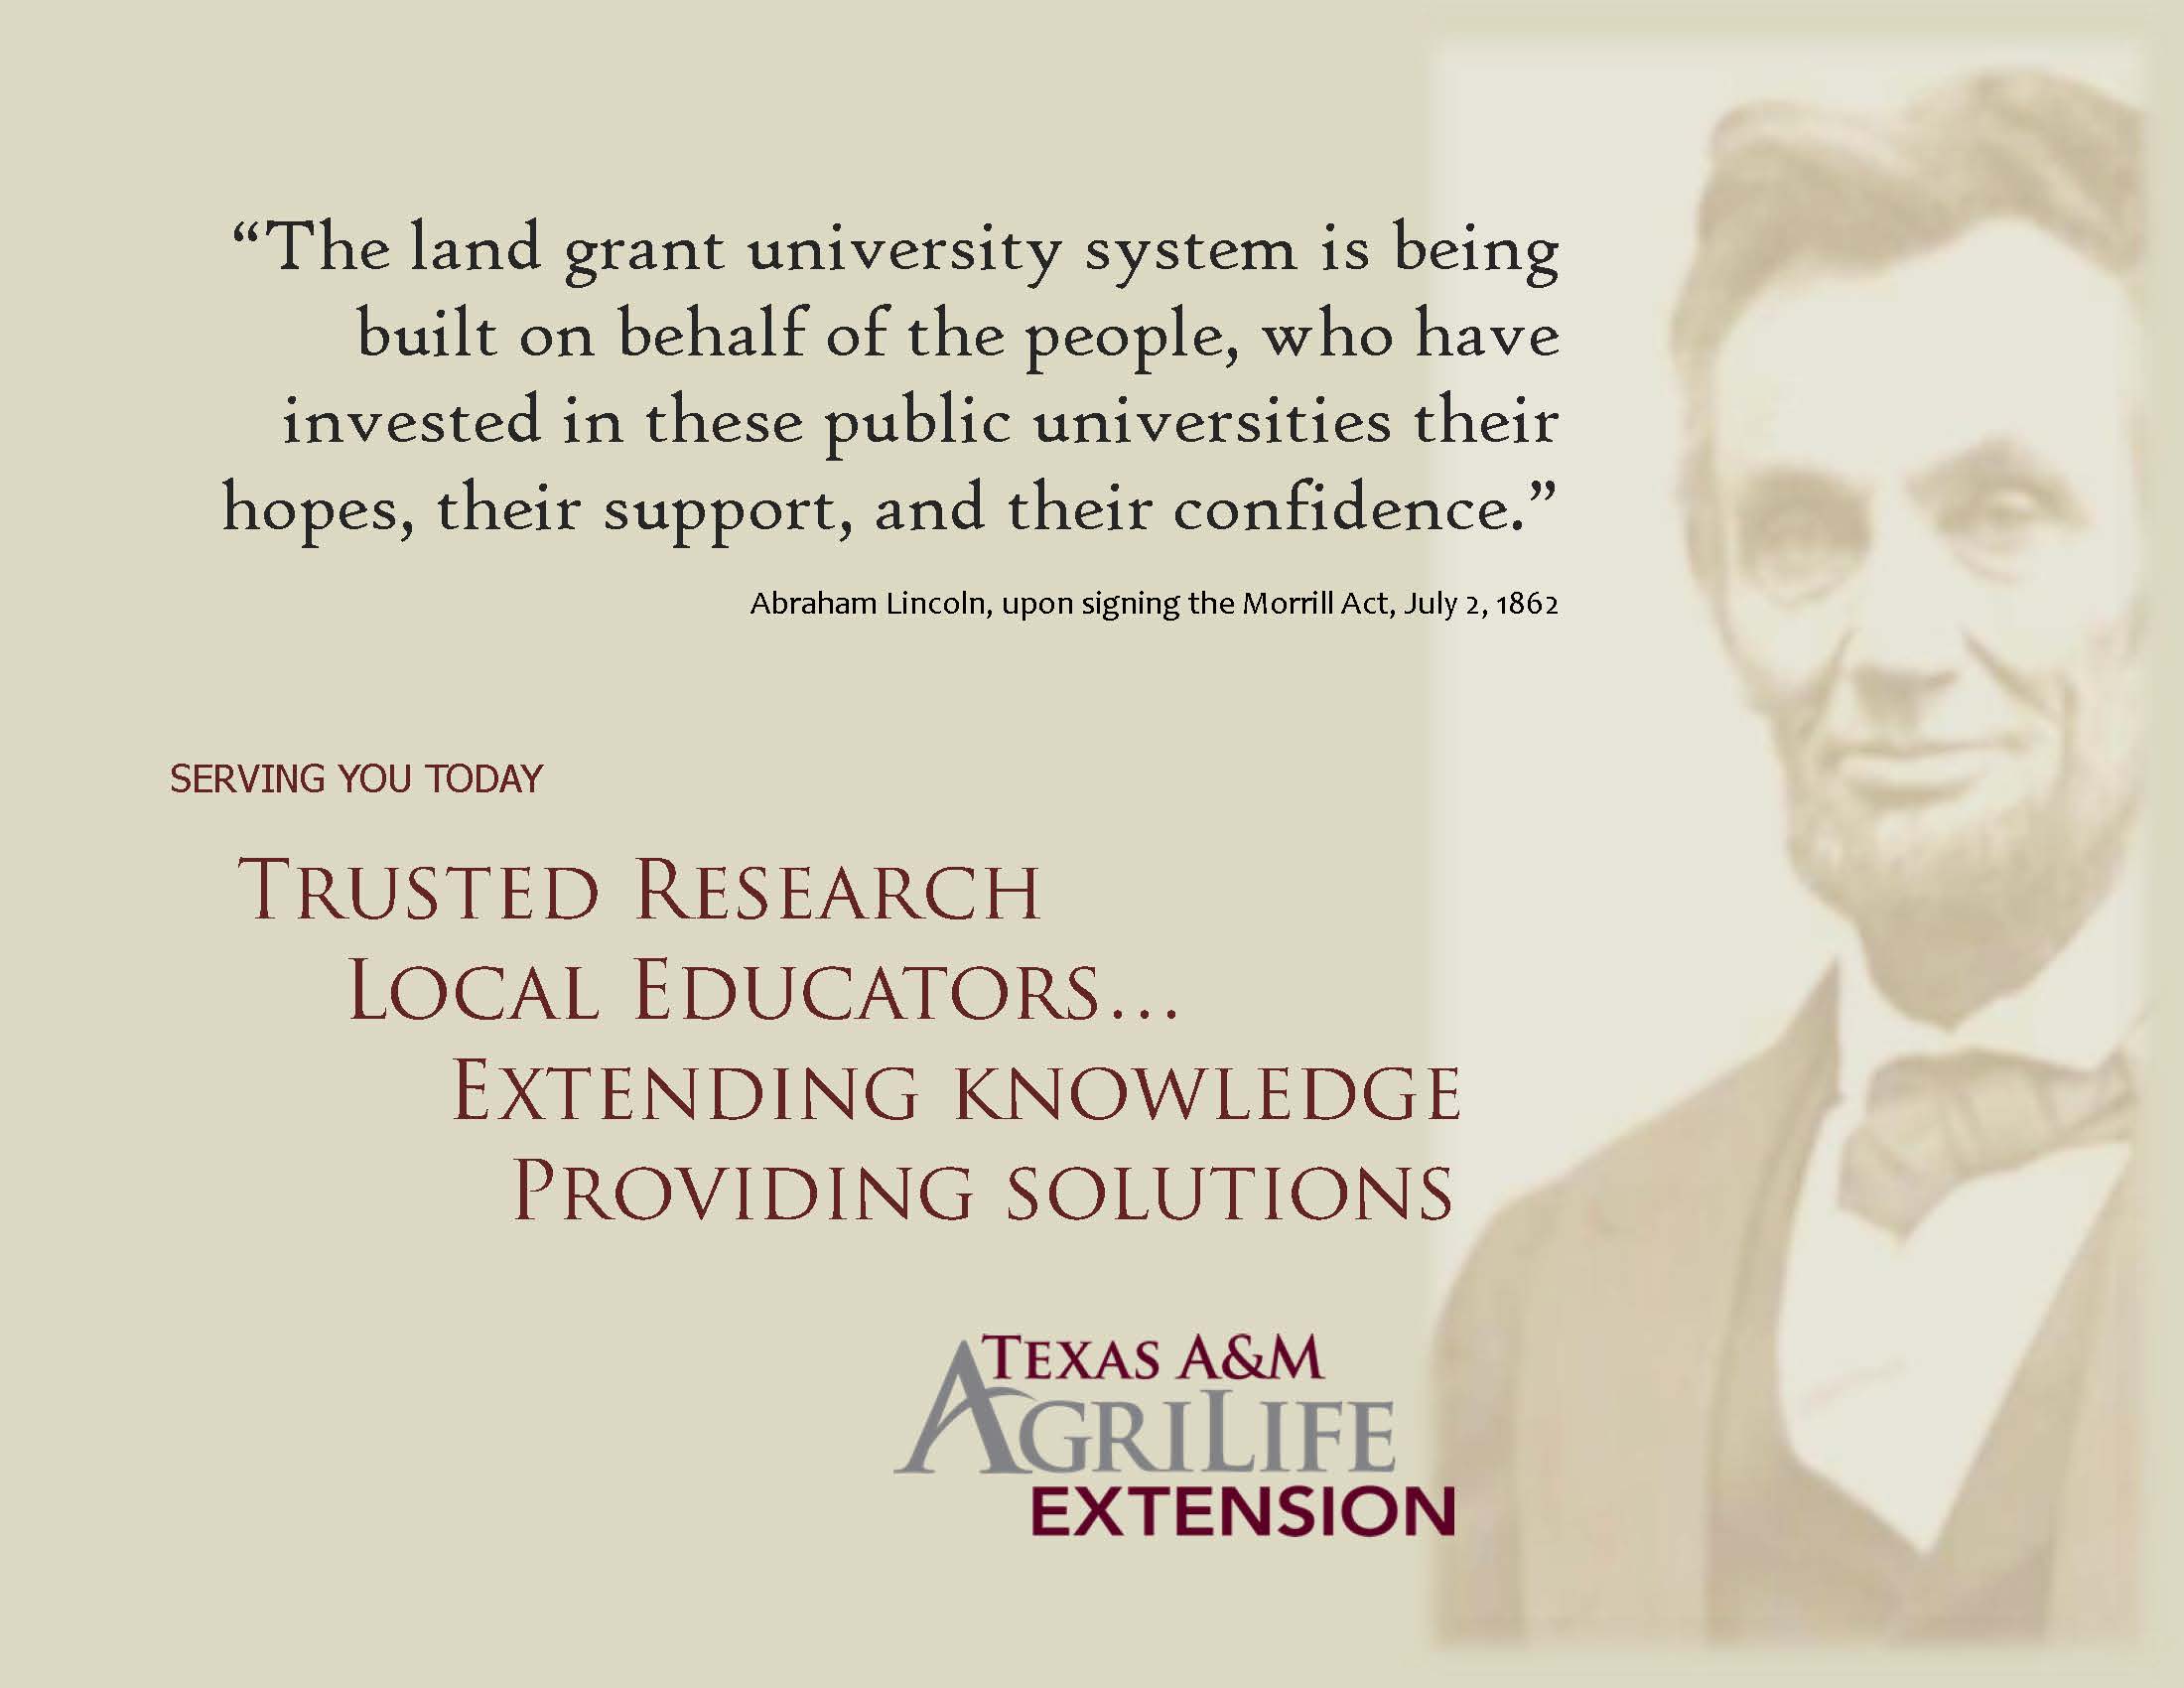 The land grant university system is being built on behalf of the people, who have invested in these public universities their hopes, their support, and their ... Abraham Linclon